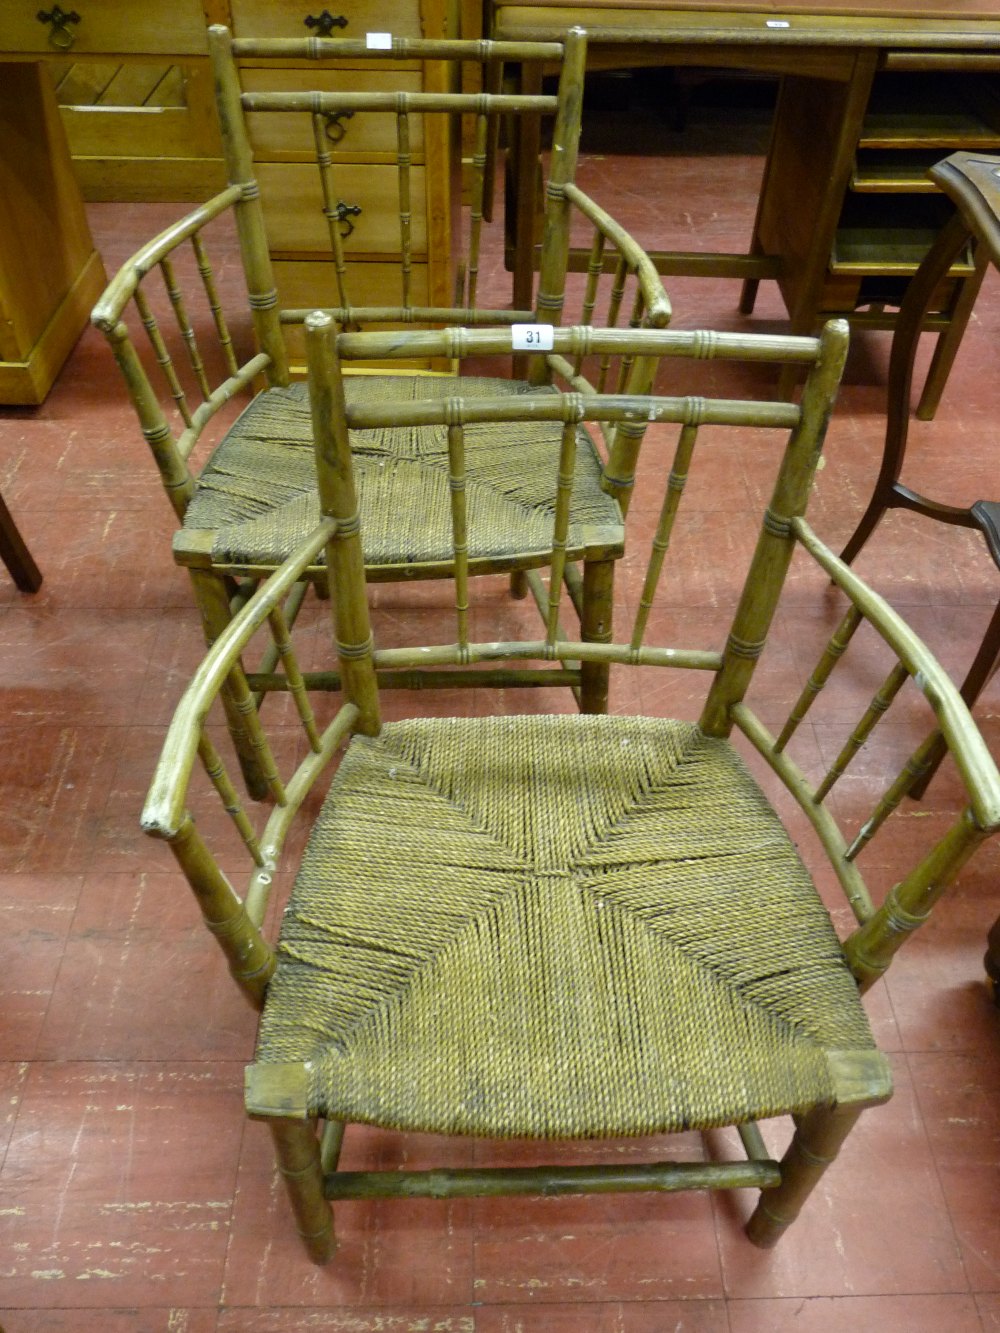 A PAIR OF FAUX BAMBOO ARMCHAIRS, late 18th/early 19th Century, rush seated with curved arms and with